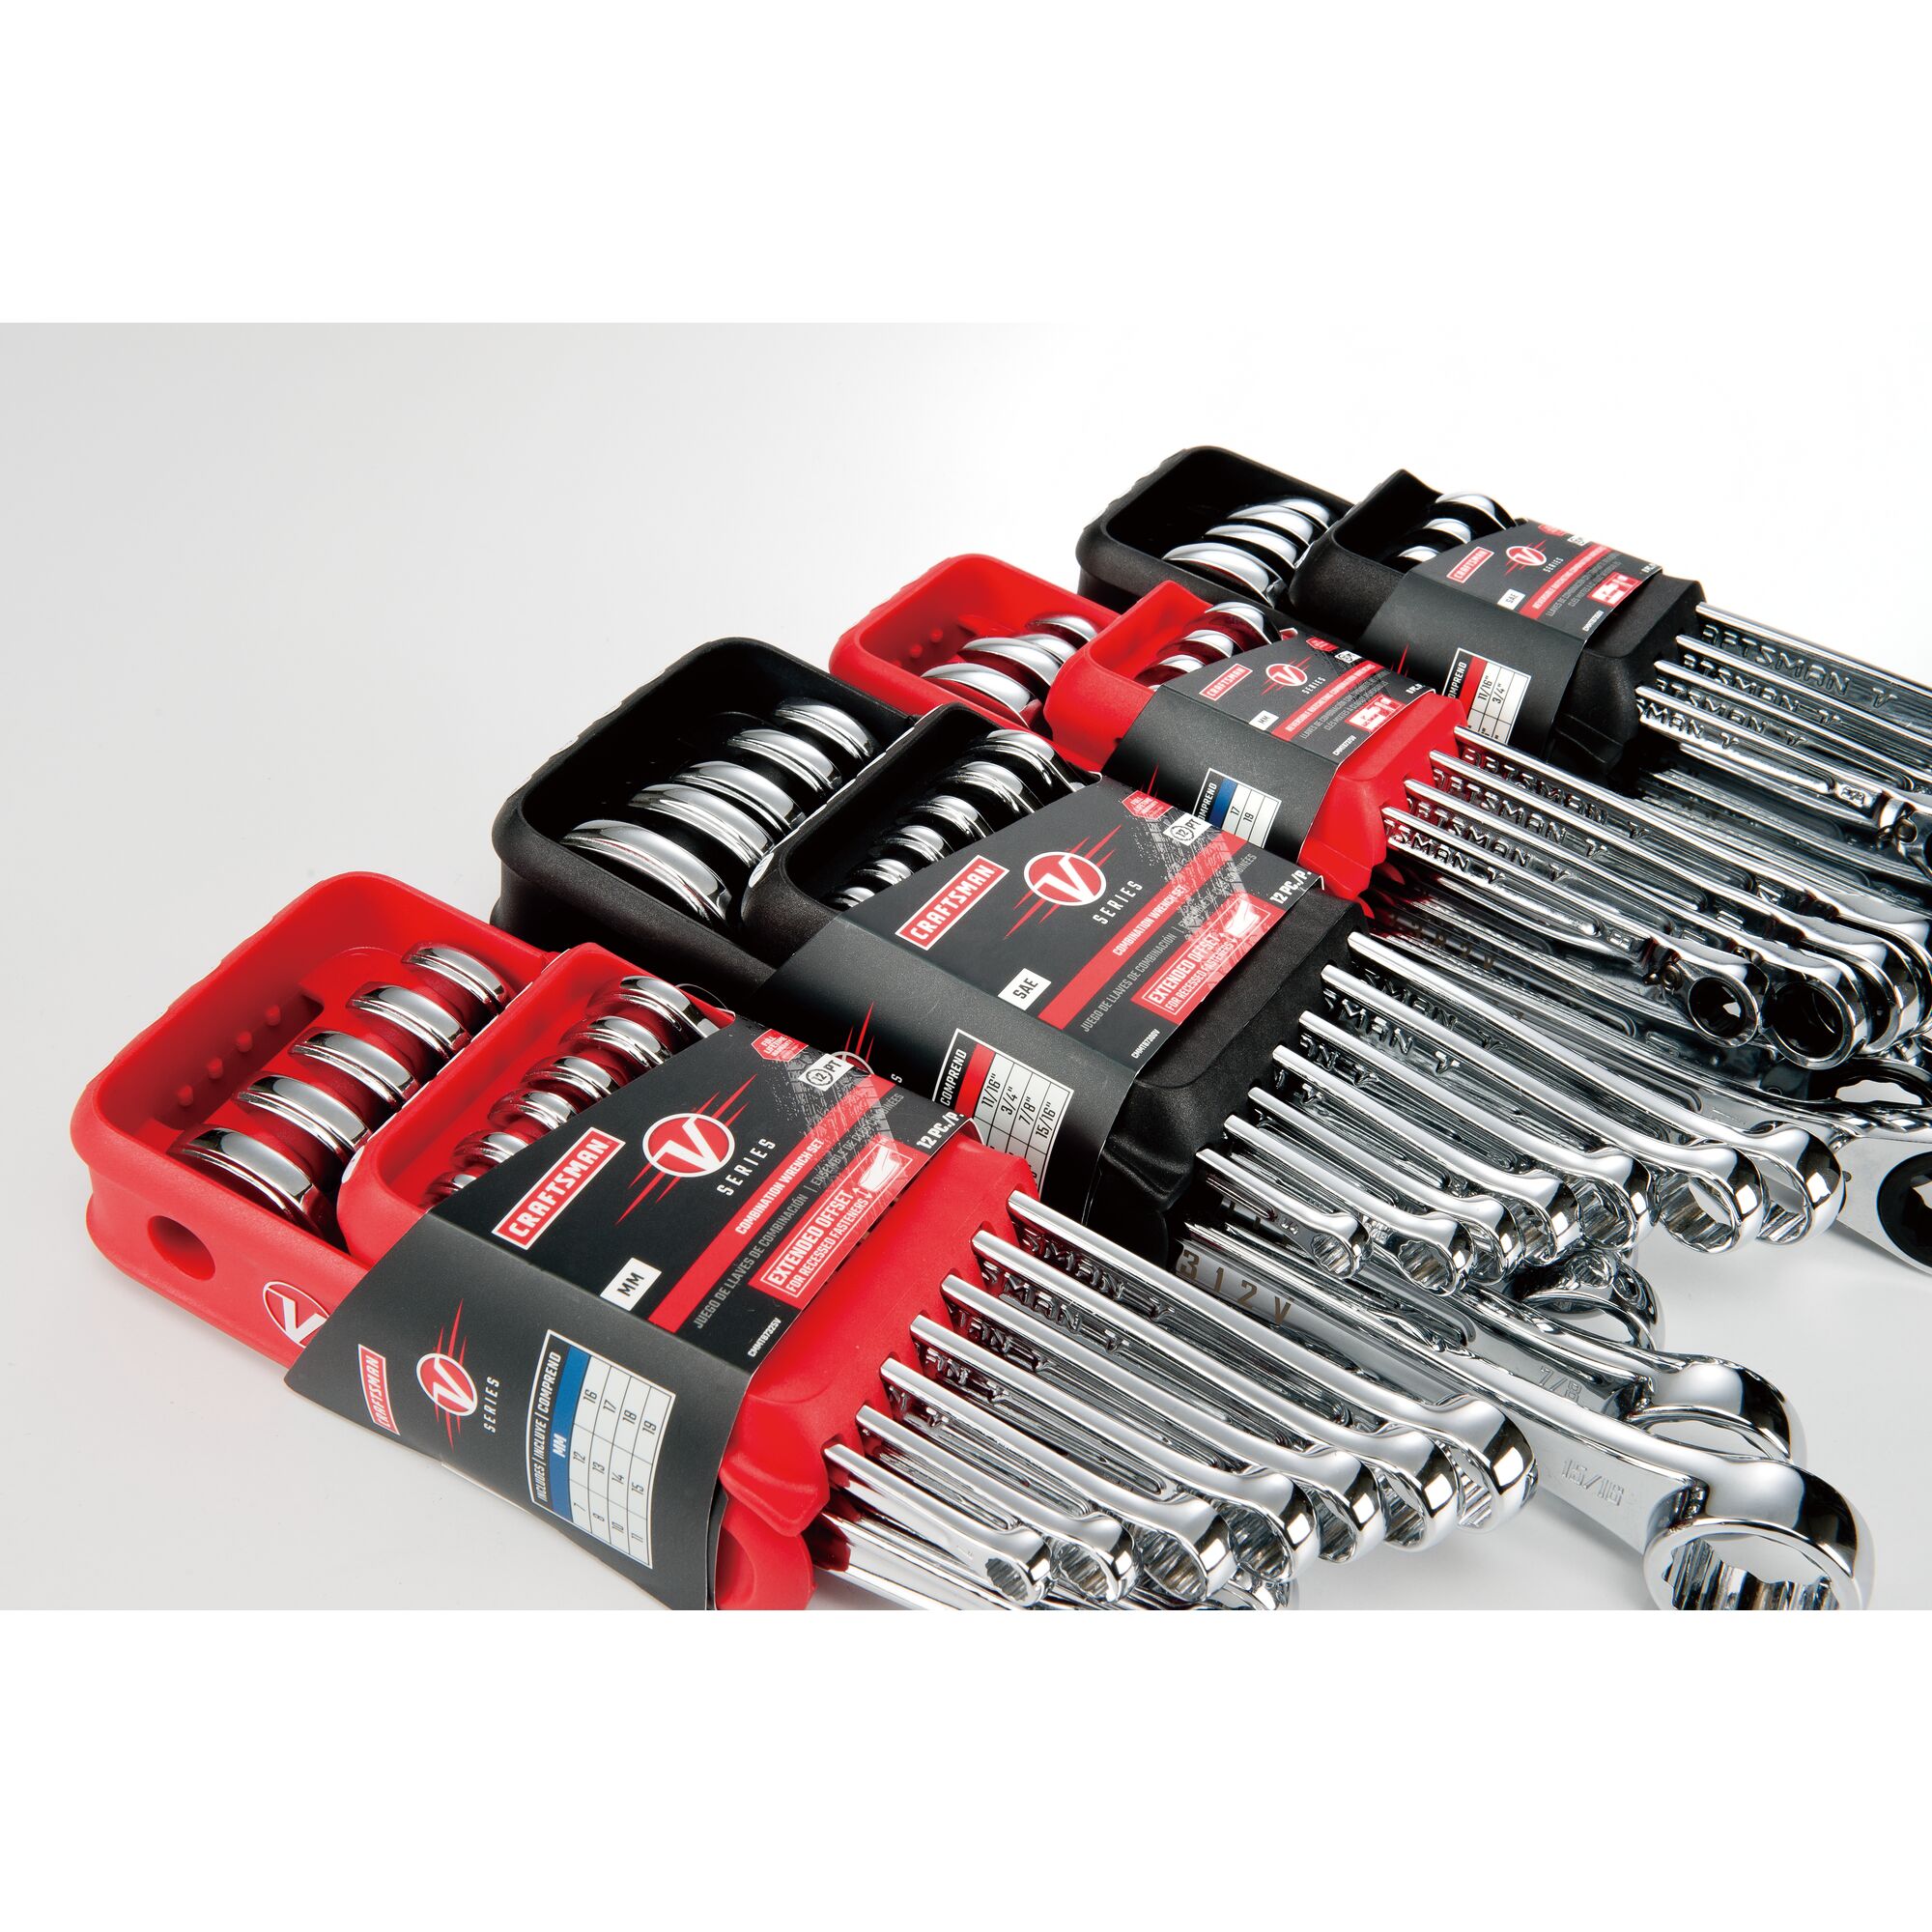 CRAFTSMAN V-Series 8-Piece Set 12-point Metric Ratchet Wrench in the Ratchet  Wrenches  Sets department at